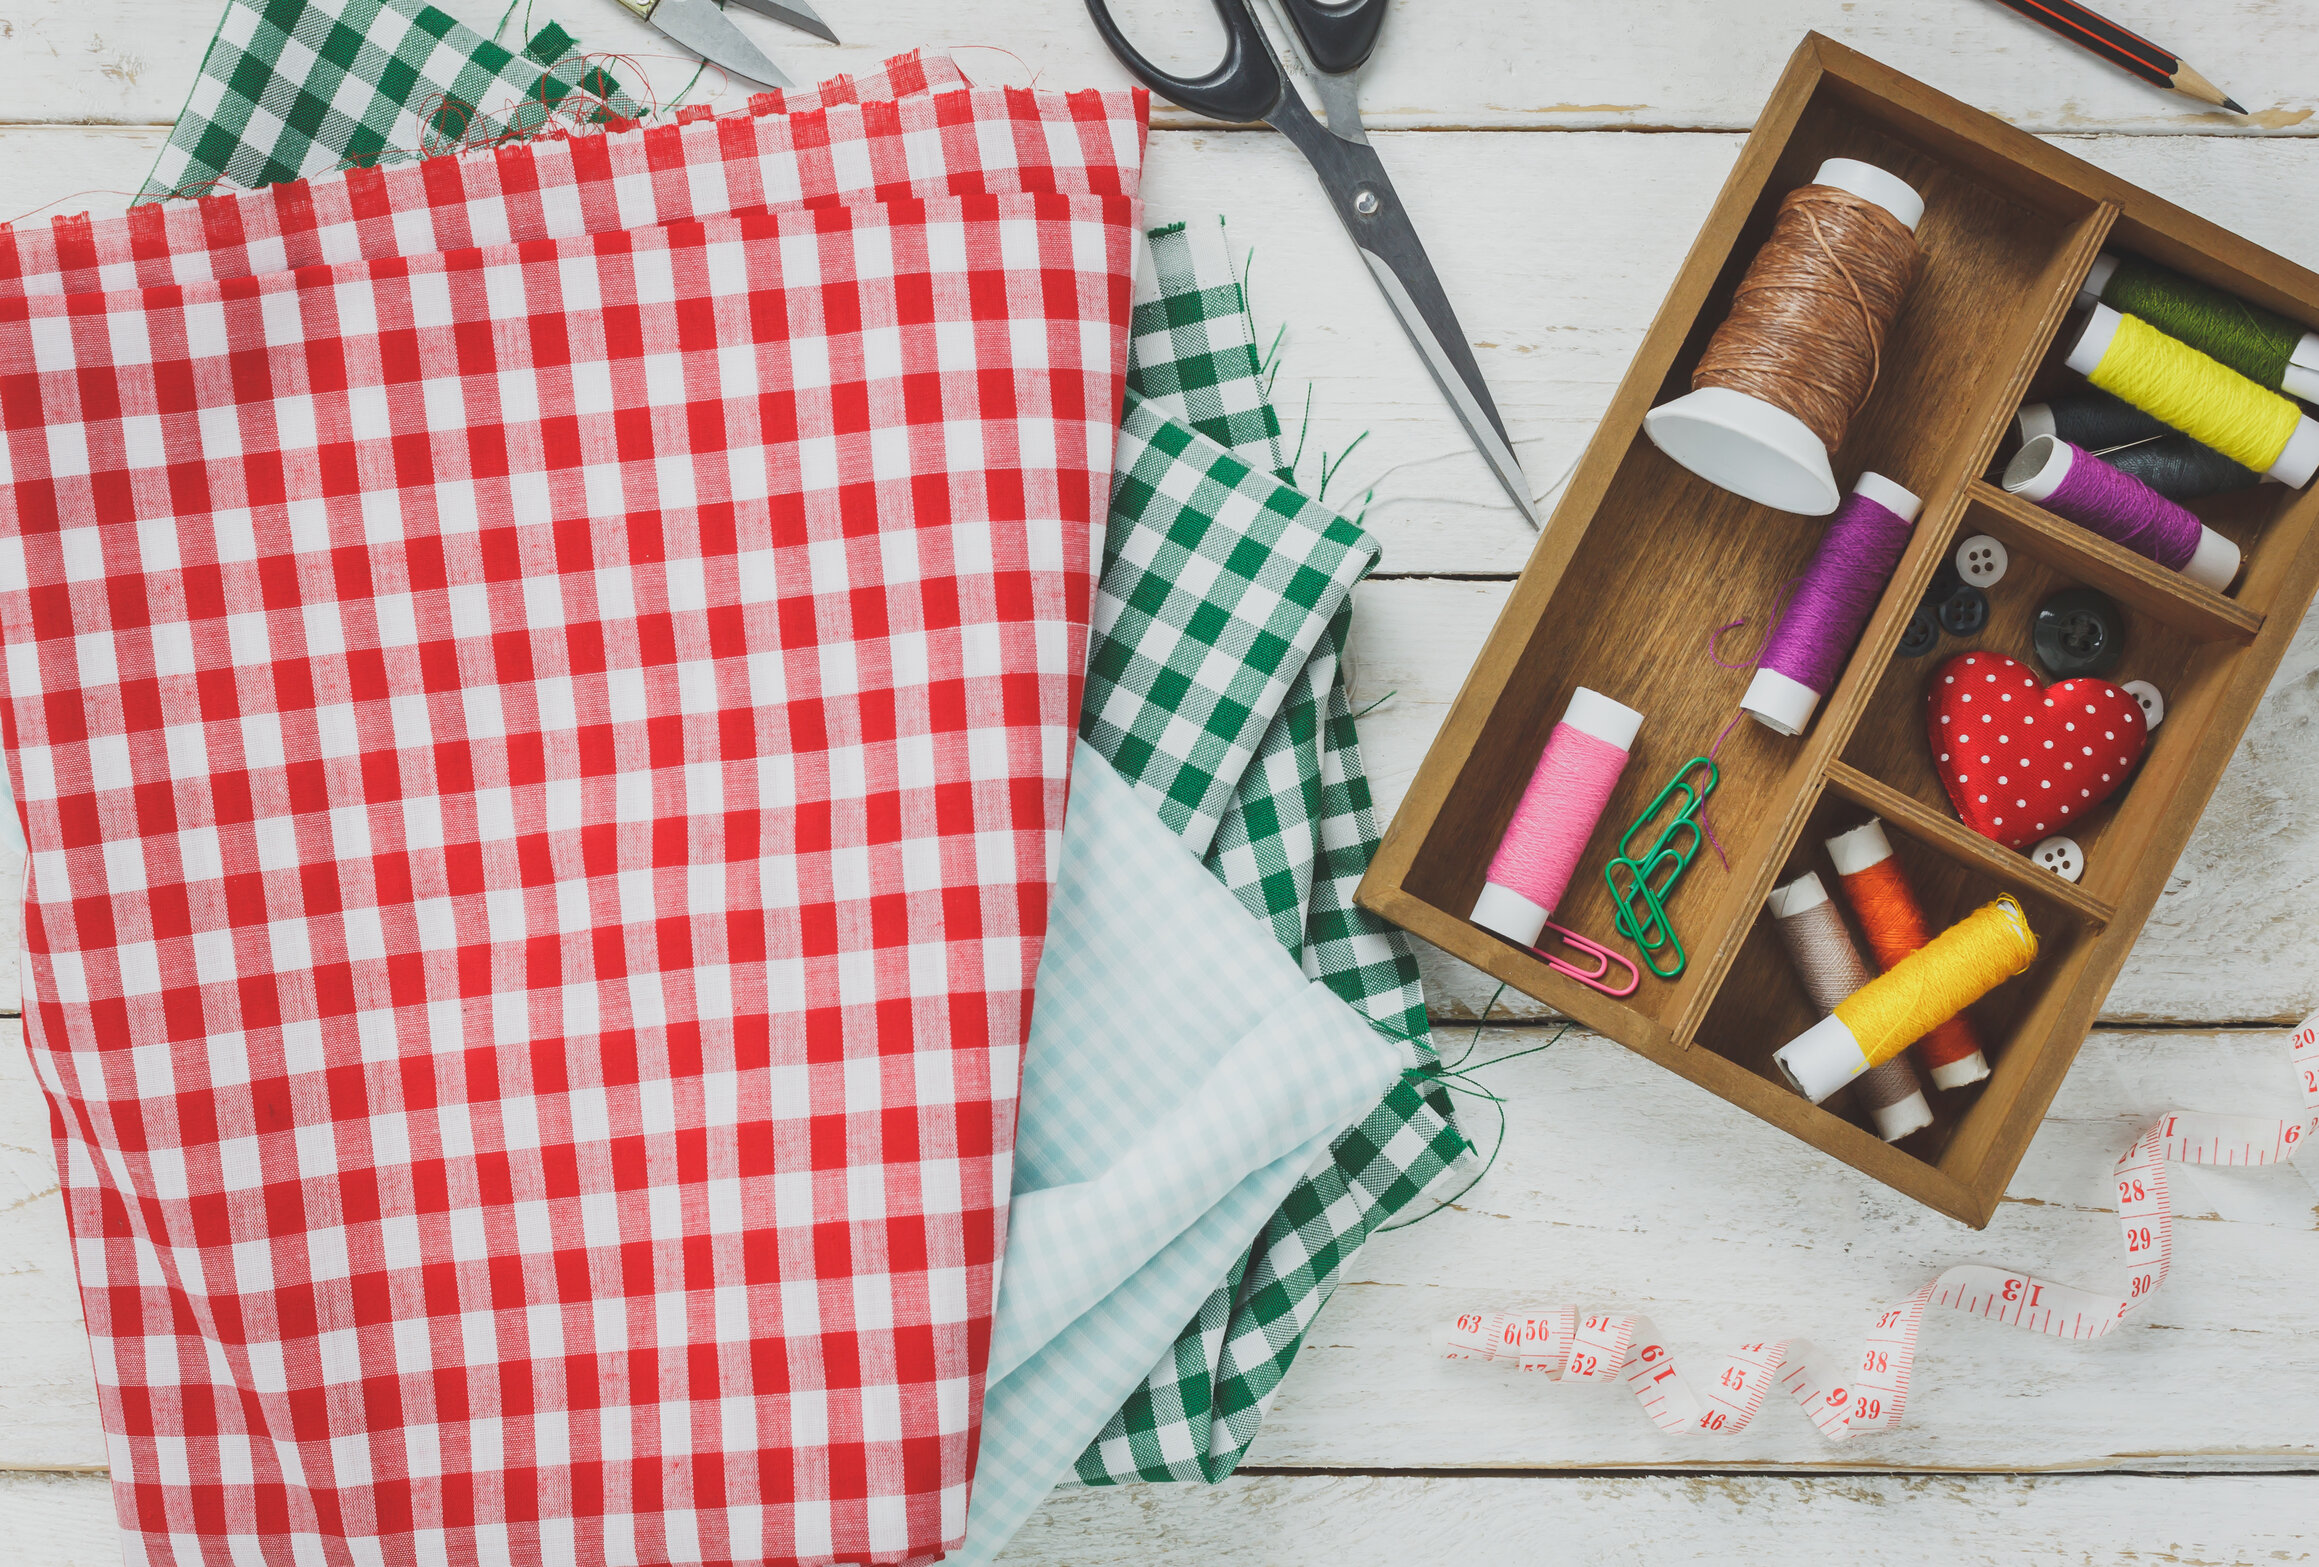 Benefits of Investing in a Fabric Starter Kit